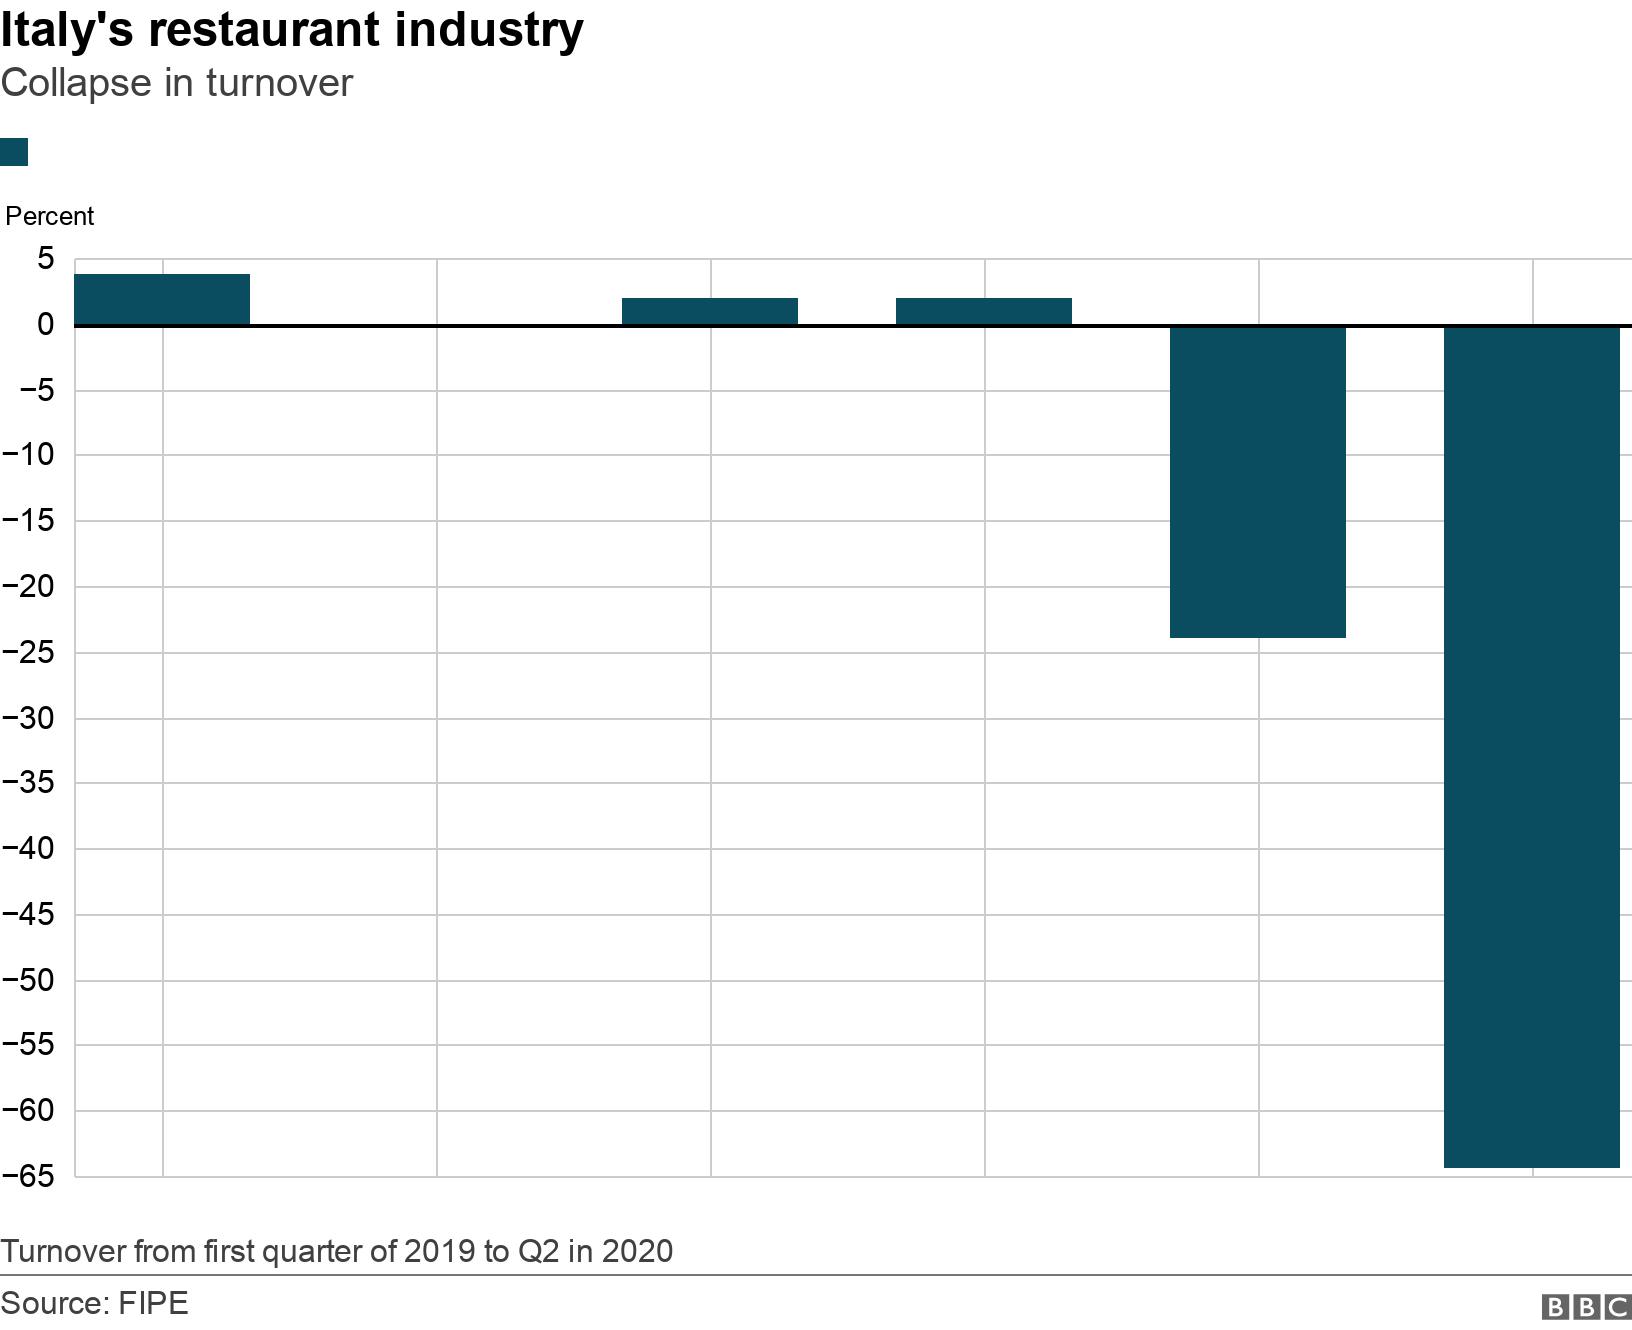 Italy's restaurant industry. Collapse in turnover. Collapse in turnover from Q1 in 2019 to Q2 in 2020 Turnover from first quarter of 2019 to Q2 in 2020.